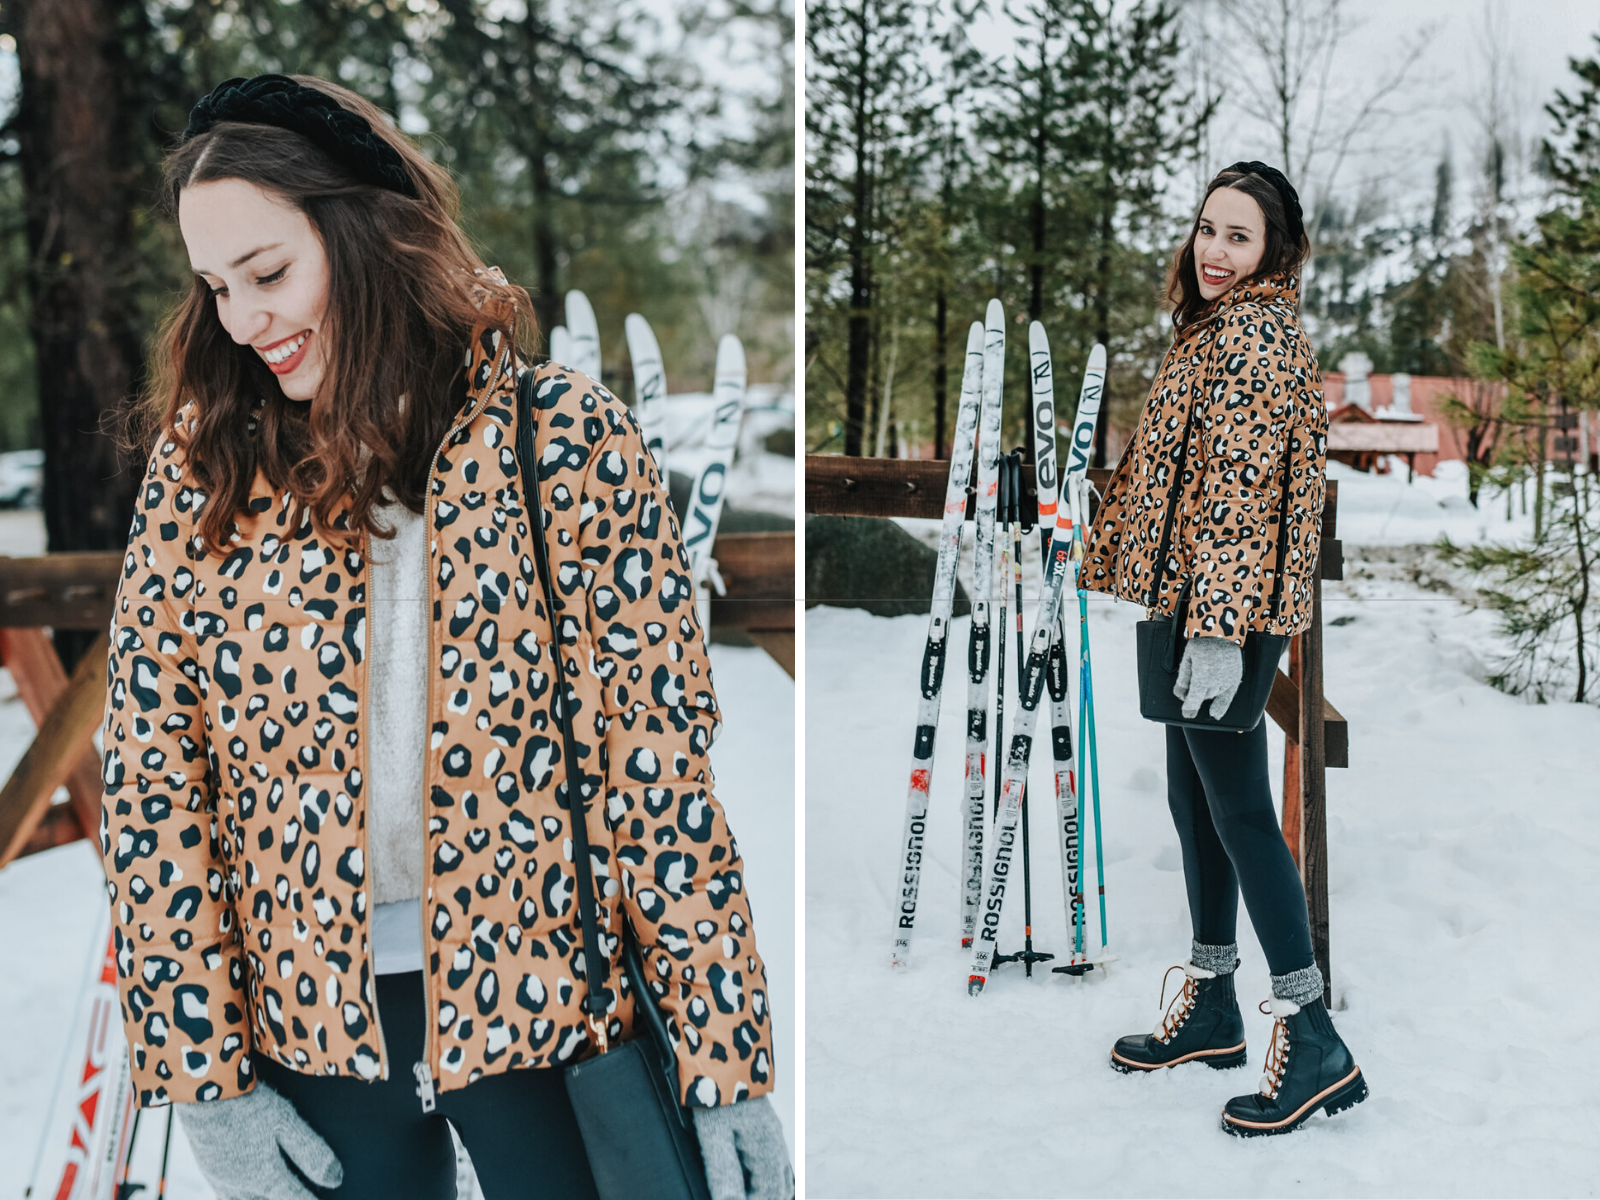 Leopard Puffer Jacket styled for Winter by top Memphis fashion blog, Lone Star Looking Glass: image of a woman wearing a Who What Wear leopard puffer jacket.